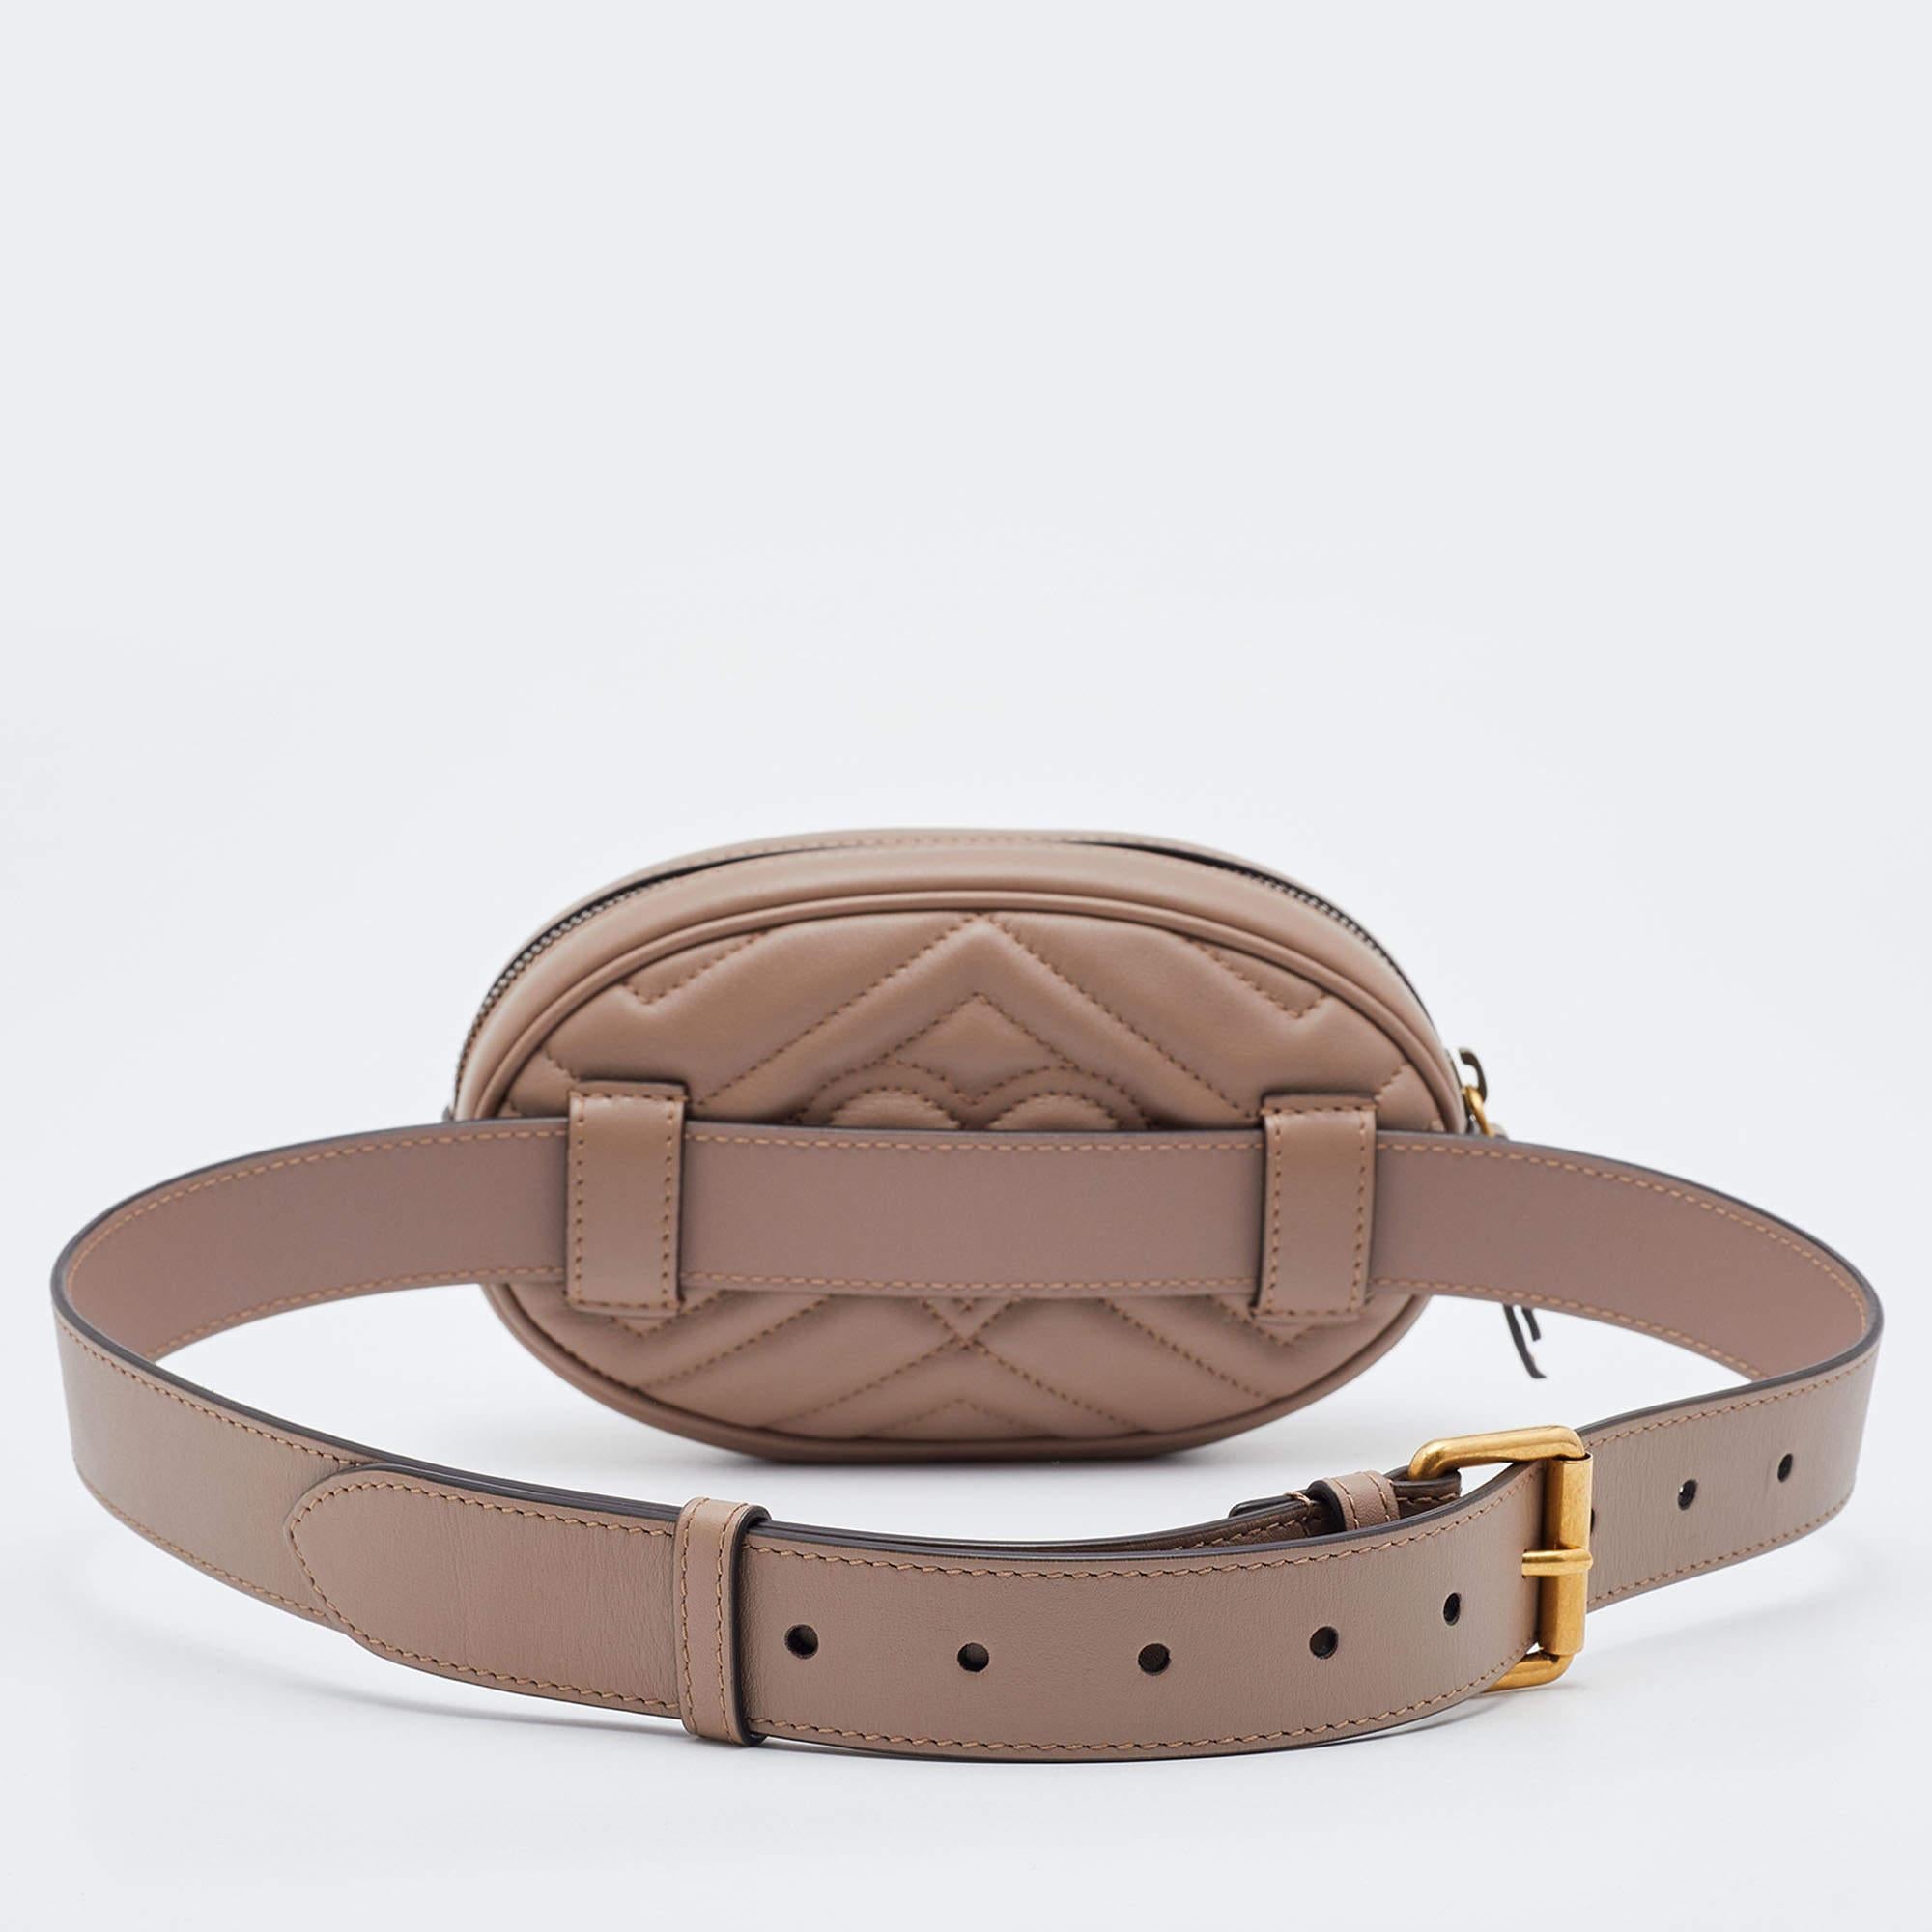 Innovative and sophisticated, this Gucci Marmont belt bag evokes a sense of classic glamour. Finely crafted from matelassé leather, it gets a luxe update with a double 'G' motif on the front.

Includes: Original Dustbag, Detachable Strap(Belt)

